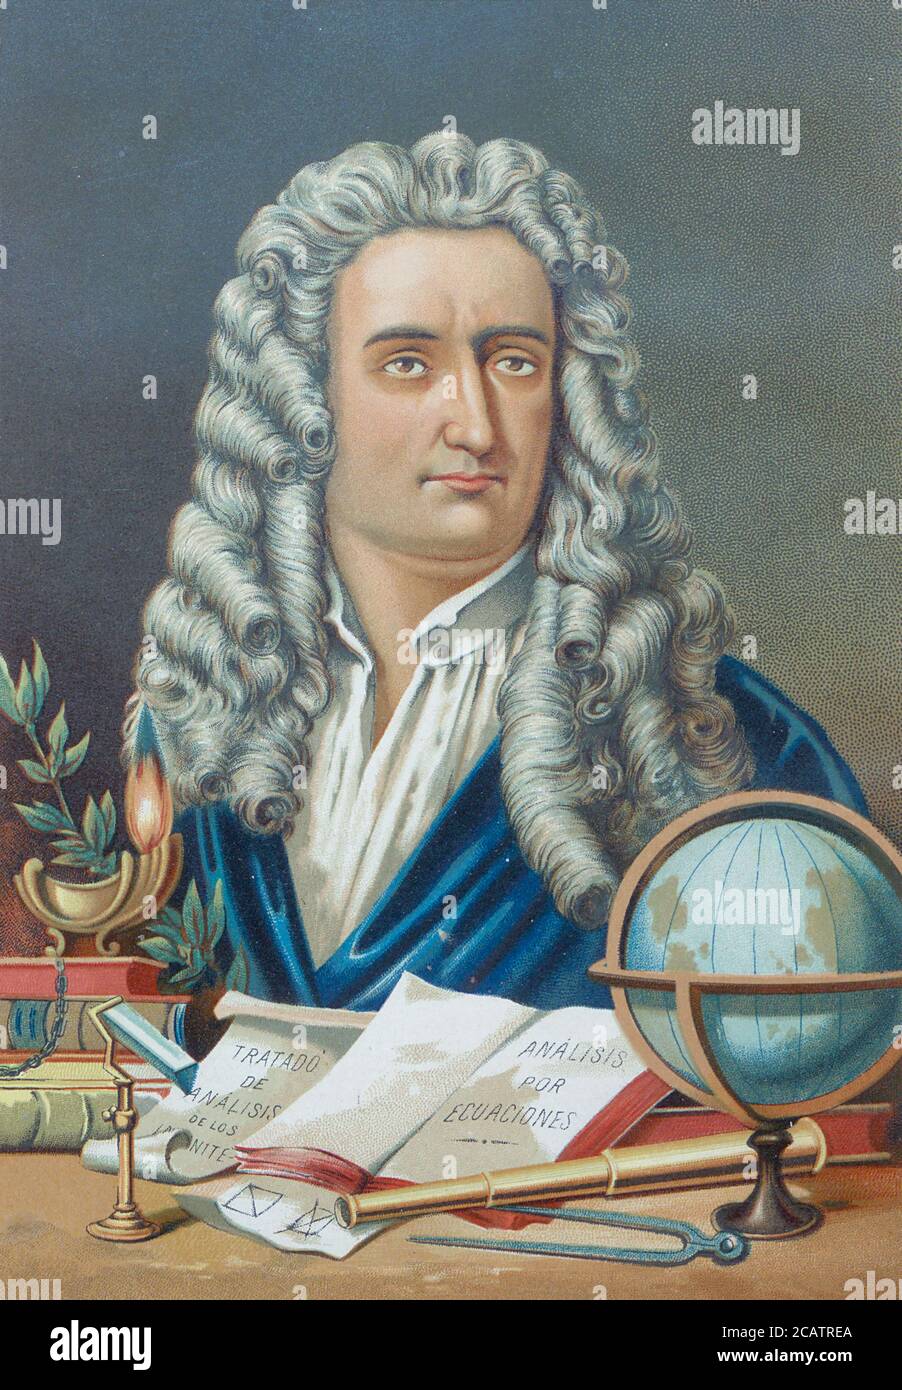 Portrait of Sir Isaac Newton PRS (25 December 1642 – 20 March 1726) was an English mathematician, physicist, astronomer, theologian, and author From the book La ciencia y sus hombres : vidas de los sabios ilustres desde la antigüedad hasta el siglo XIX T. 3  [Science and its men: lives of the illustrious sages from antiquity to the 19th century Vol 3] By by Figuier, Louis, (1819-1894); Casabó y Pagés, Pelegrín, n. 1831 Published in Barcelona by D. Jaime Seix, editor , 1879 (Imprenta de Baseda y Giró) Stock Photo